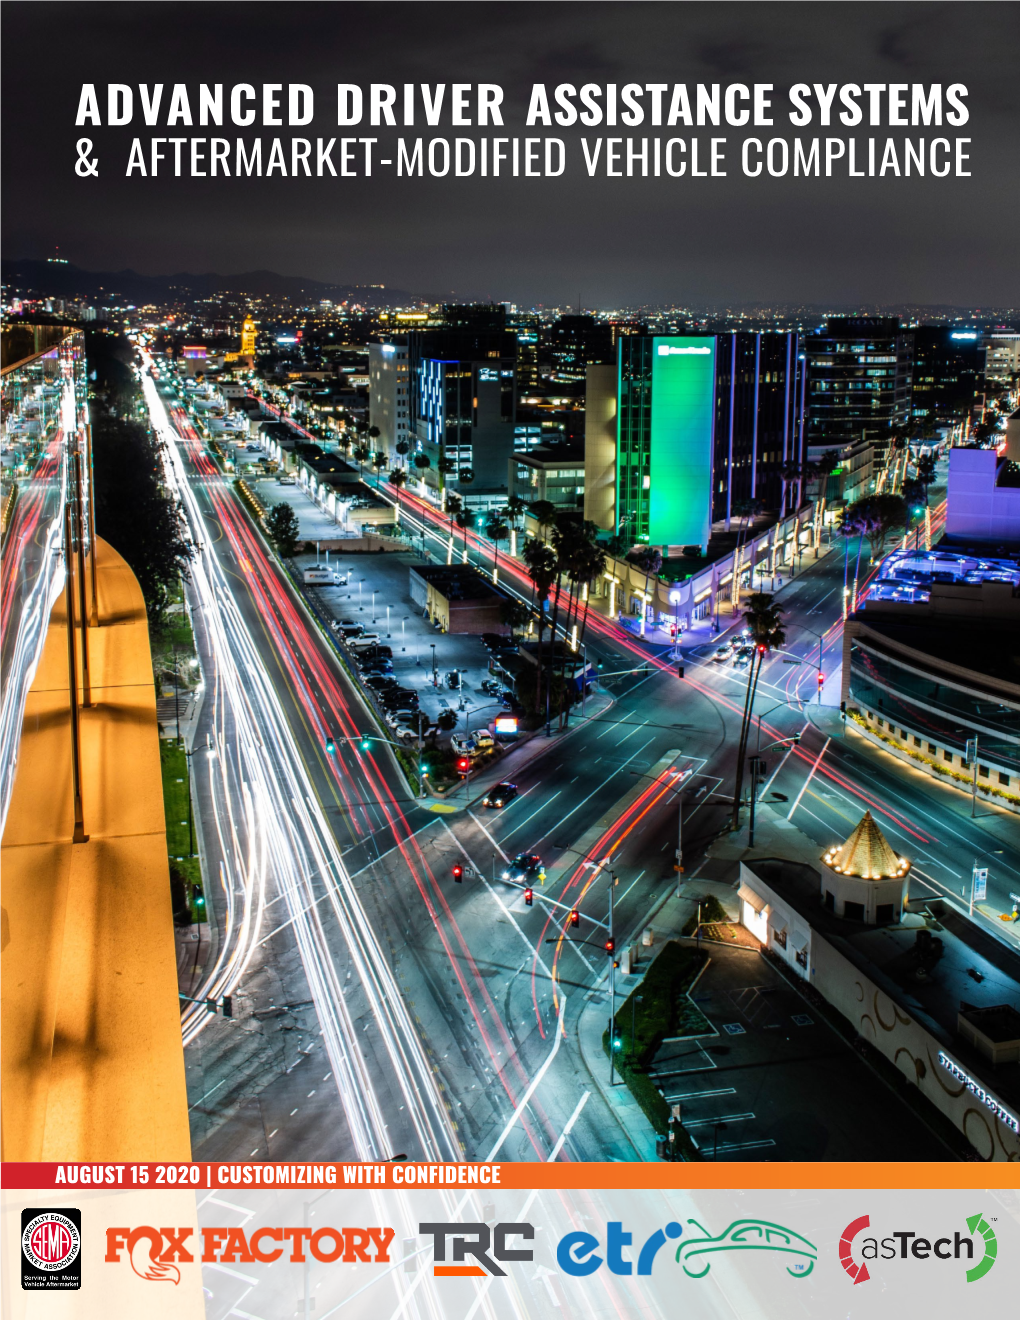 Advanced Driver Assistance Systems & Aftermarket-Modified Vehicle Compliance